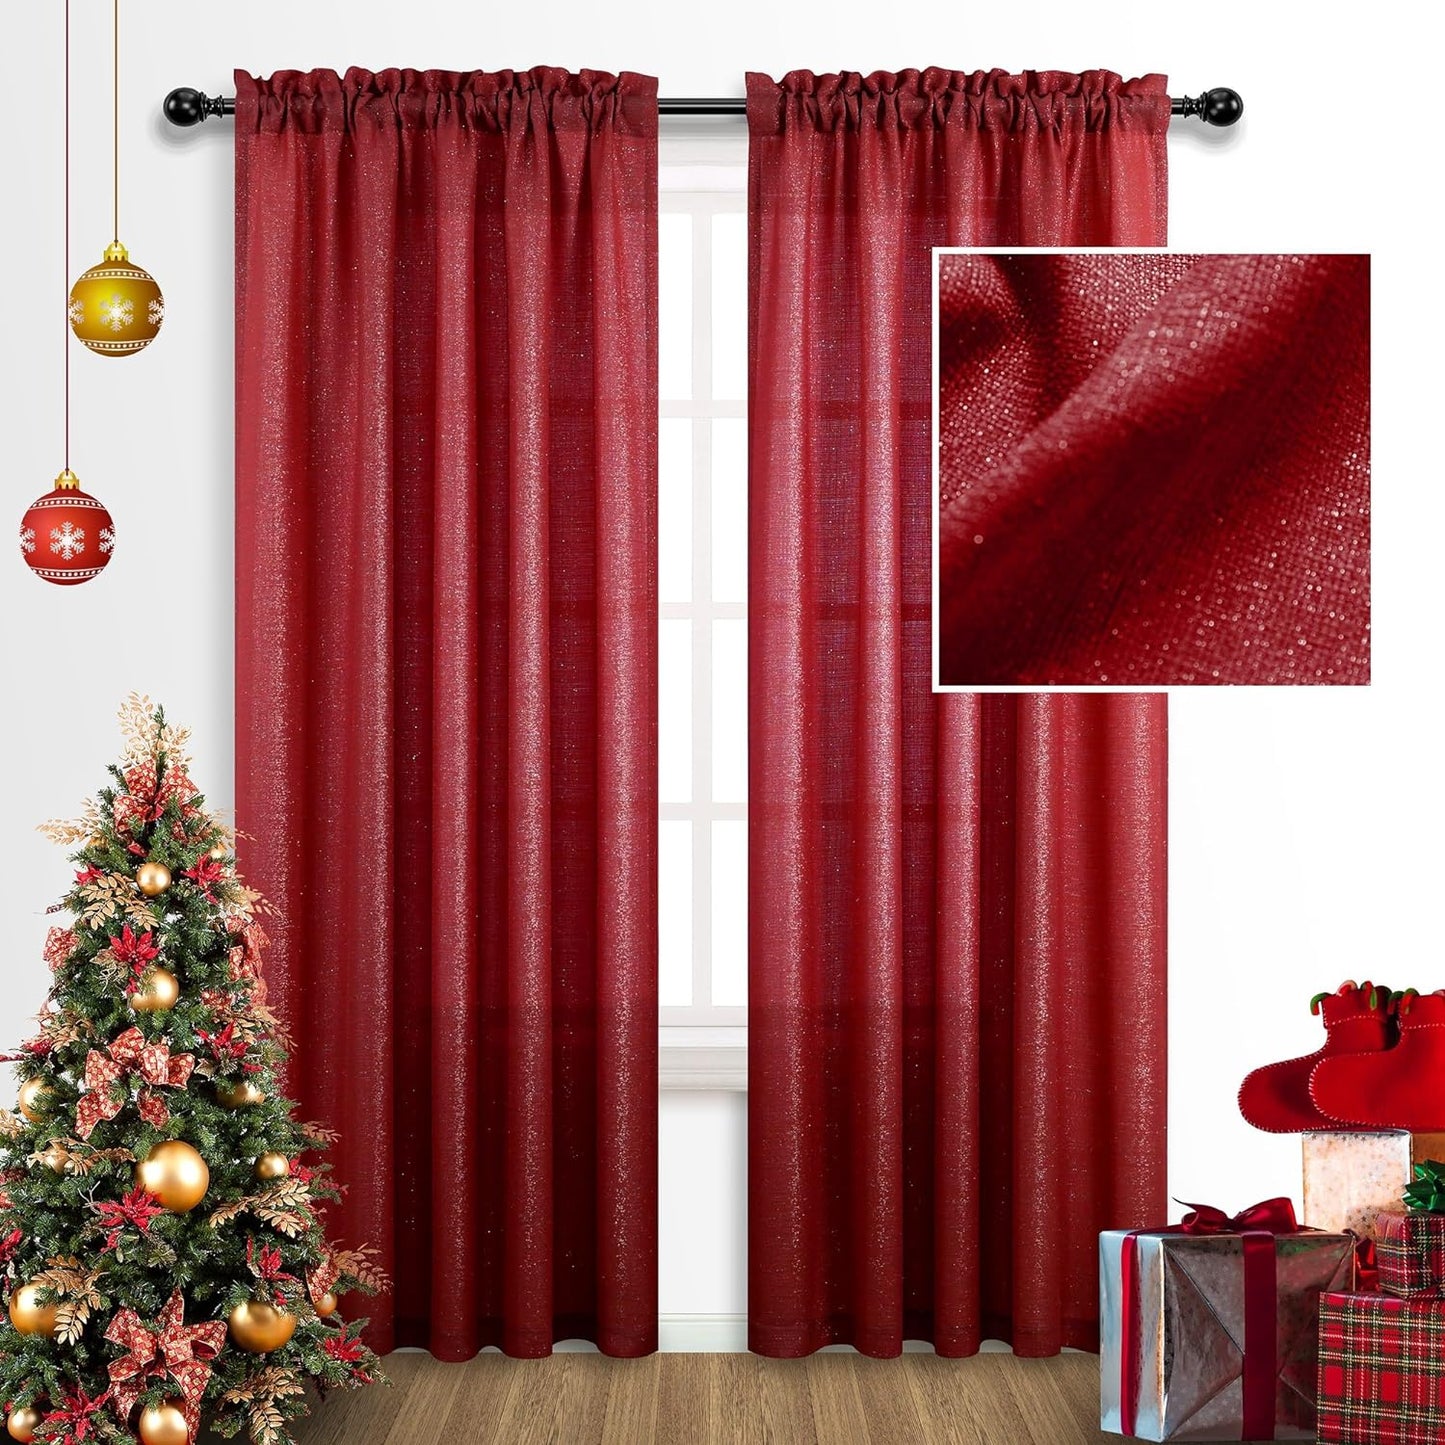 Gold Curtains 84 Inch Length for Living Room 2 Panels Set Rod Pocket Window Decor Semi Sheer Luxury Sparkle Shimmer Shiny Glitter Brown Golden Mustard Curtains for Bedroom 52X84 Long Christmas Decor  MRS.NATURALL TEXTILE Red 52X84 